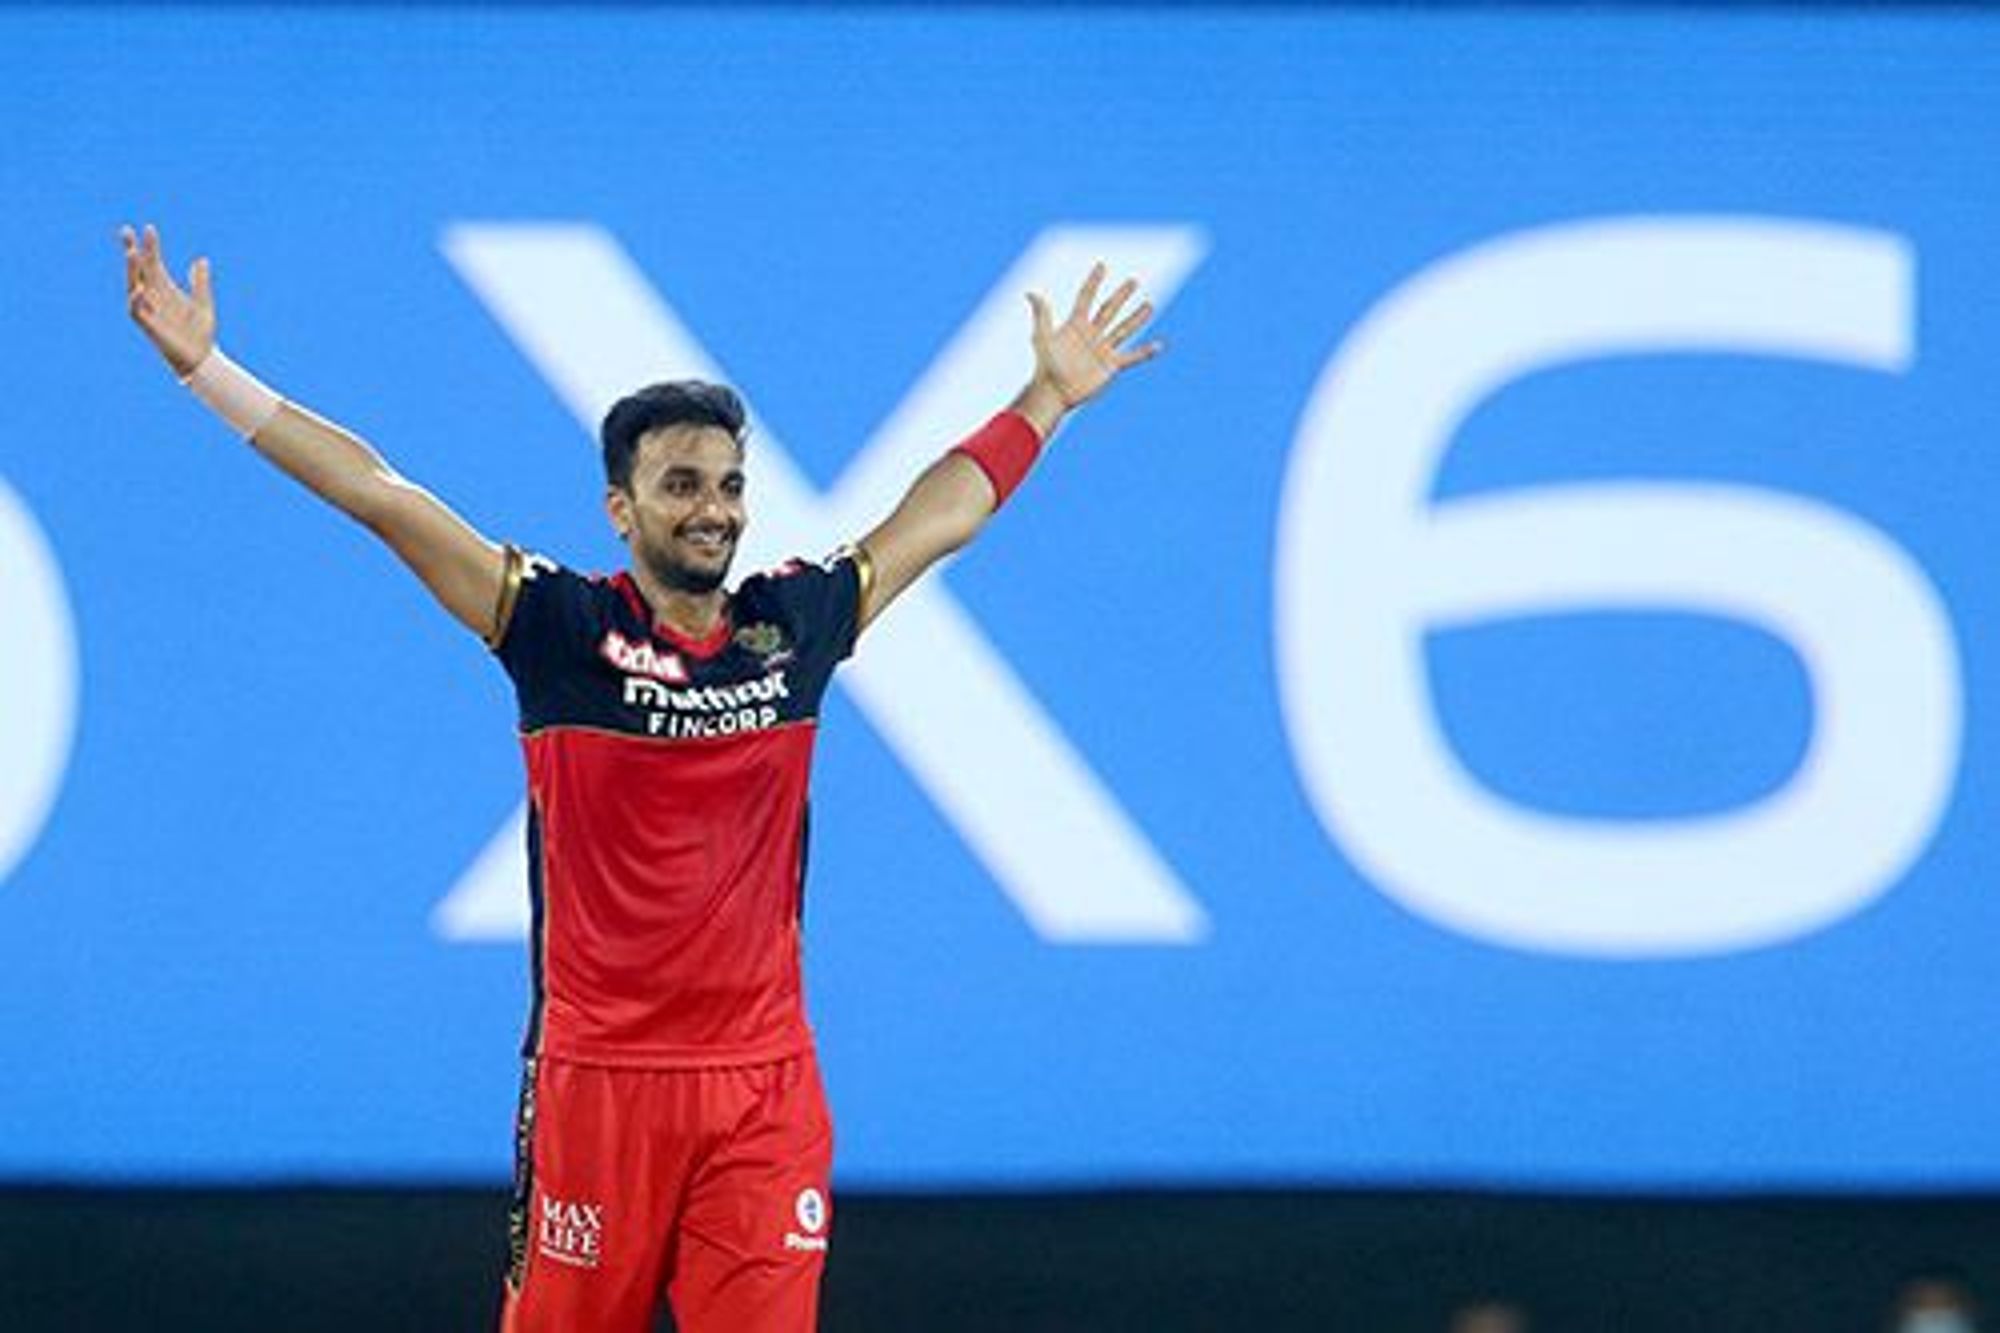 2018 IPL Auctions Motivated Him To Work On His All Round Skills Reveals Harshal Patel